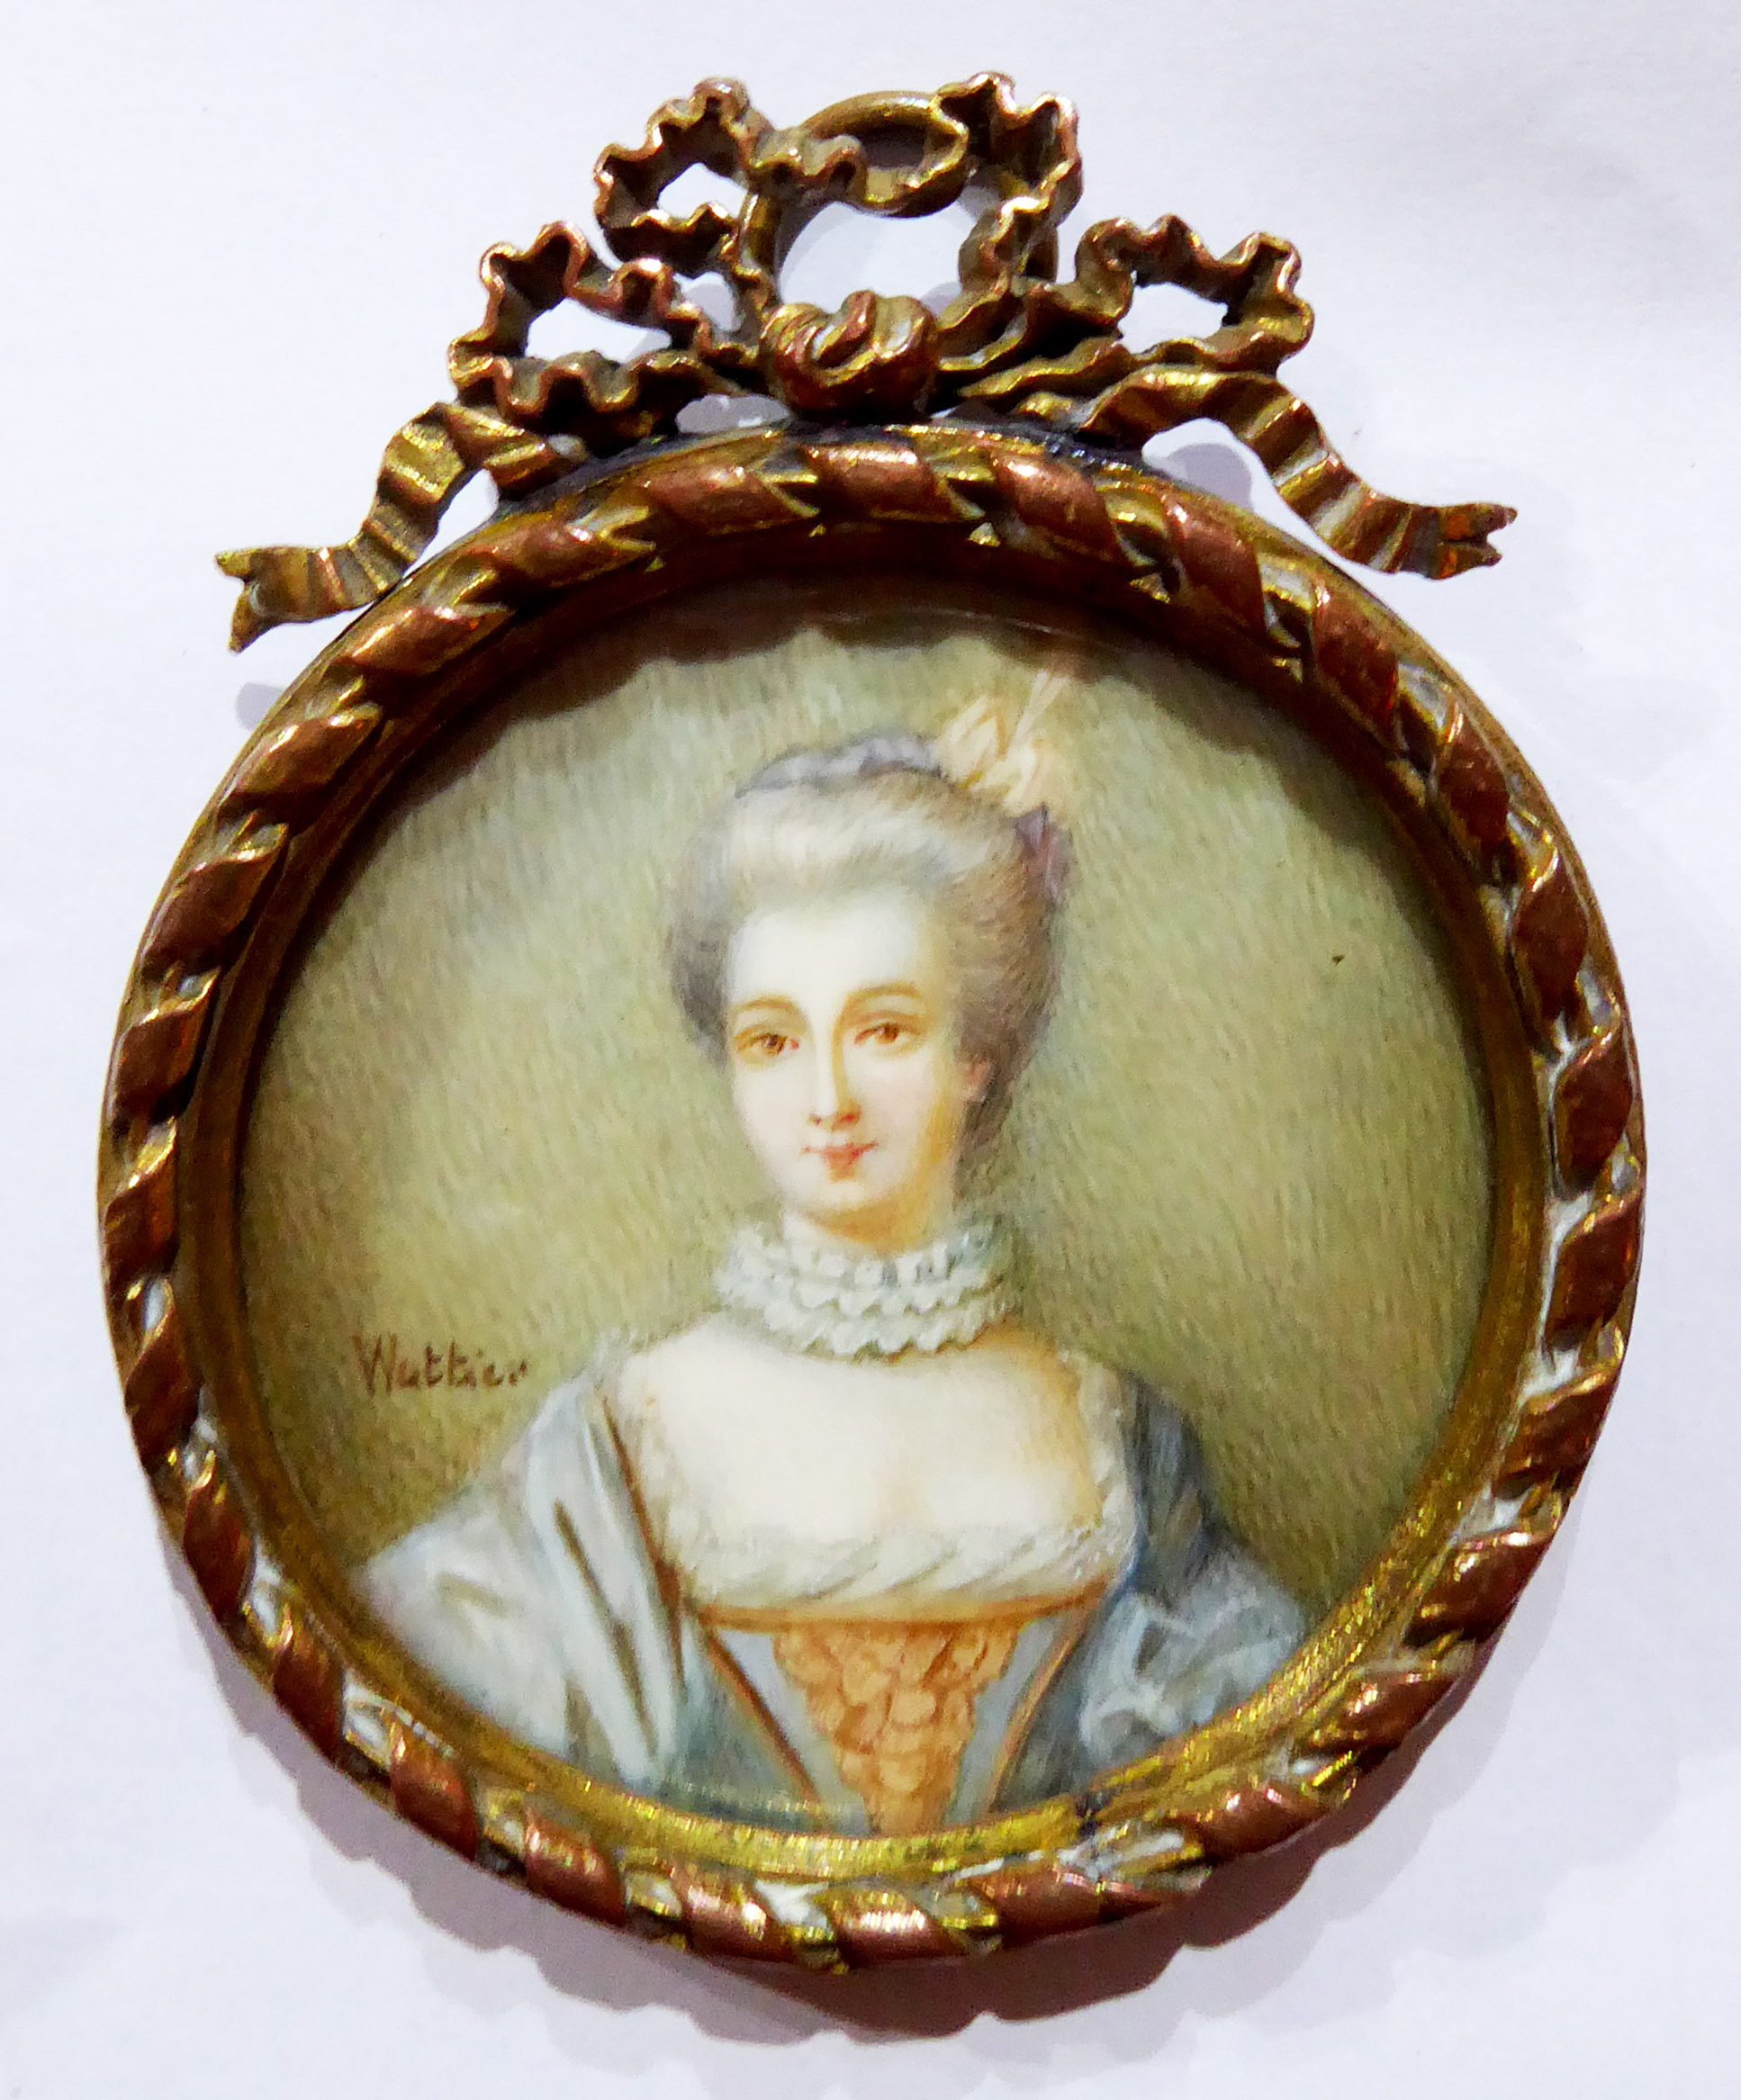 CHARLES EMILE WATTIER, FRENCH, 1800 - 1868, CIRCULAR PORTRAIT MINIATURE ON IVORY Maiden wearing a